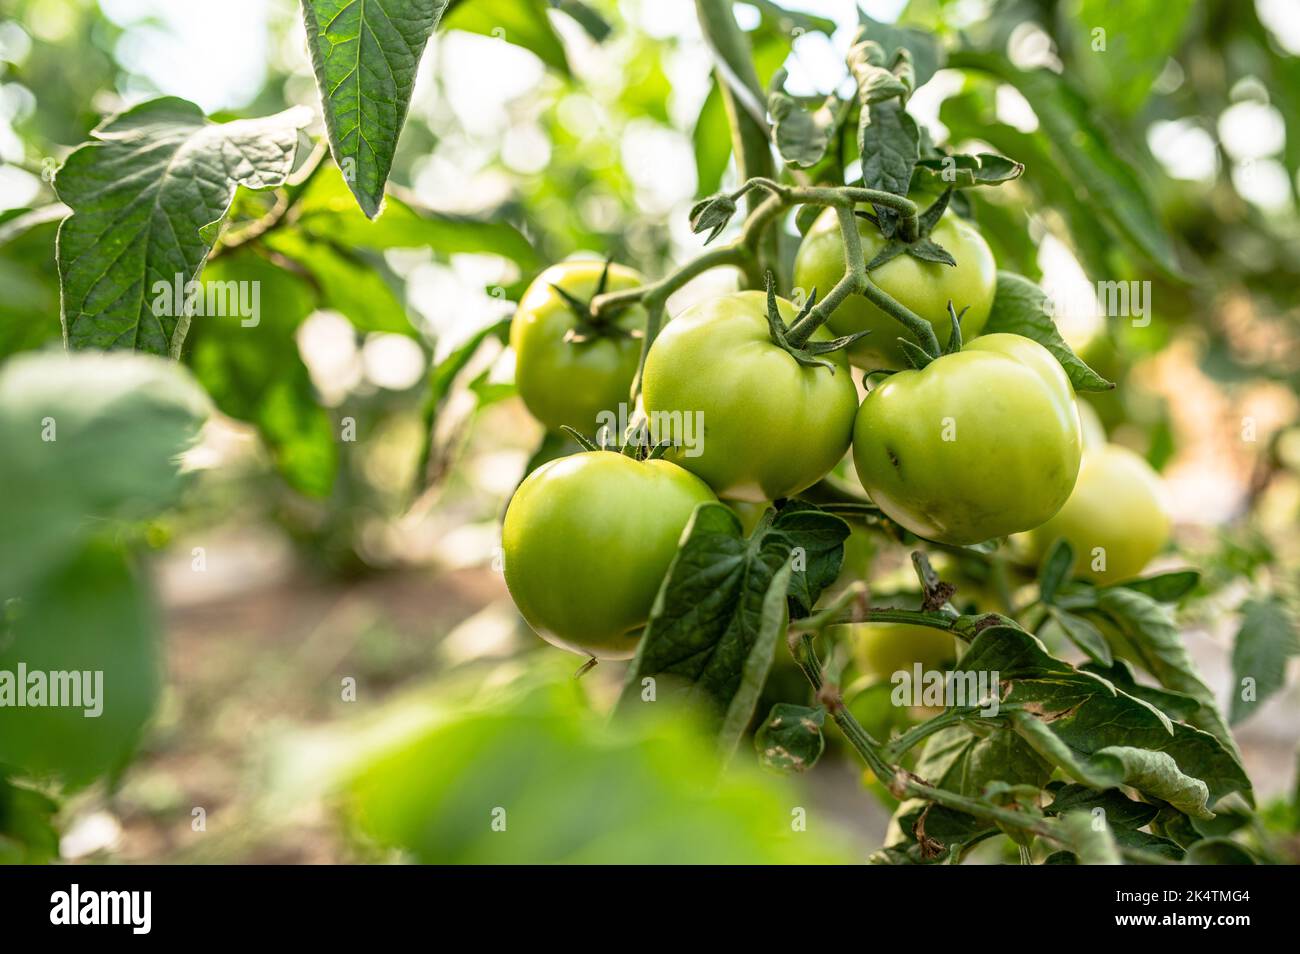 Tomato plants in greenhouse Green tomatoes plantation. Organic farming, young tomato cluster plants growth in greenhouse. Stock Photo